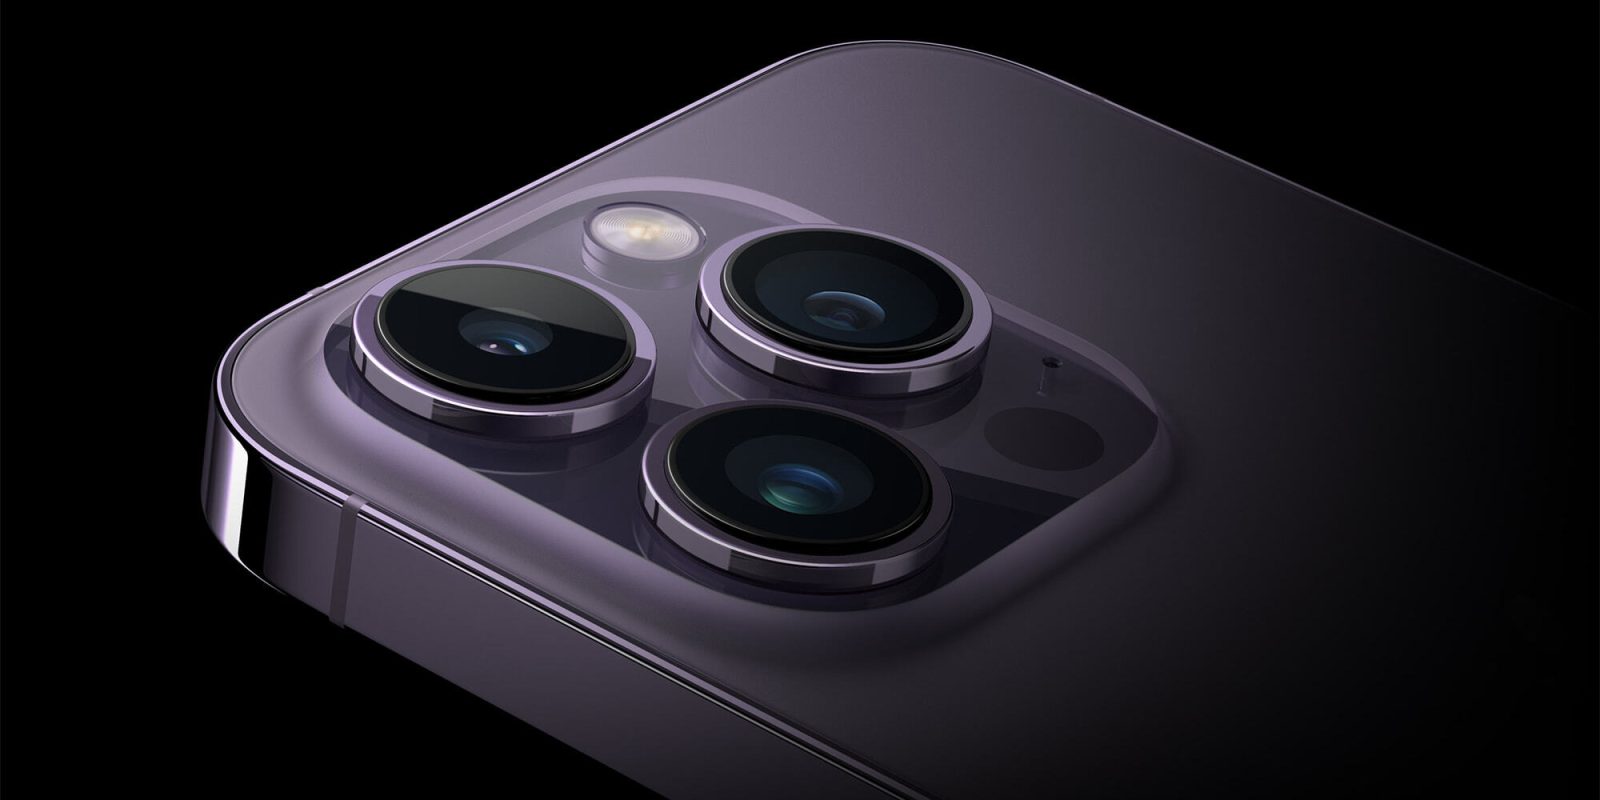 Halide makers explain exactly how iPhone 14 Pro cameras have changed